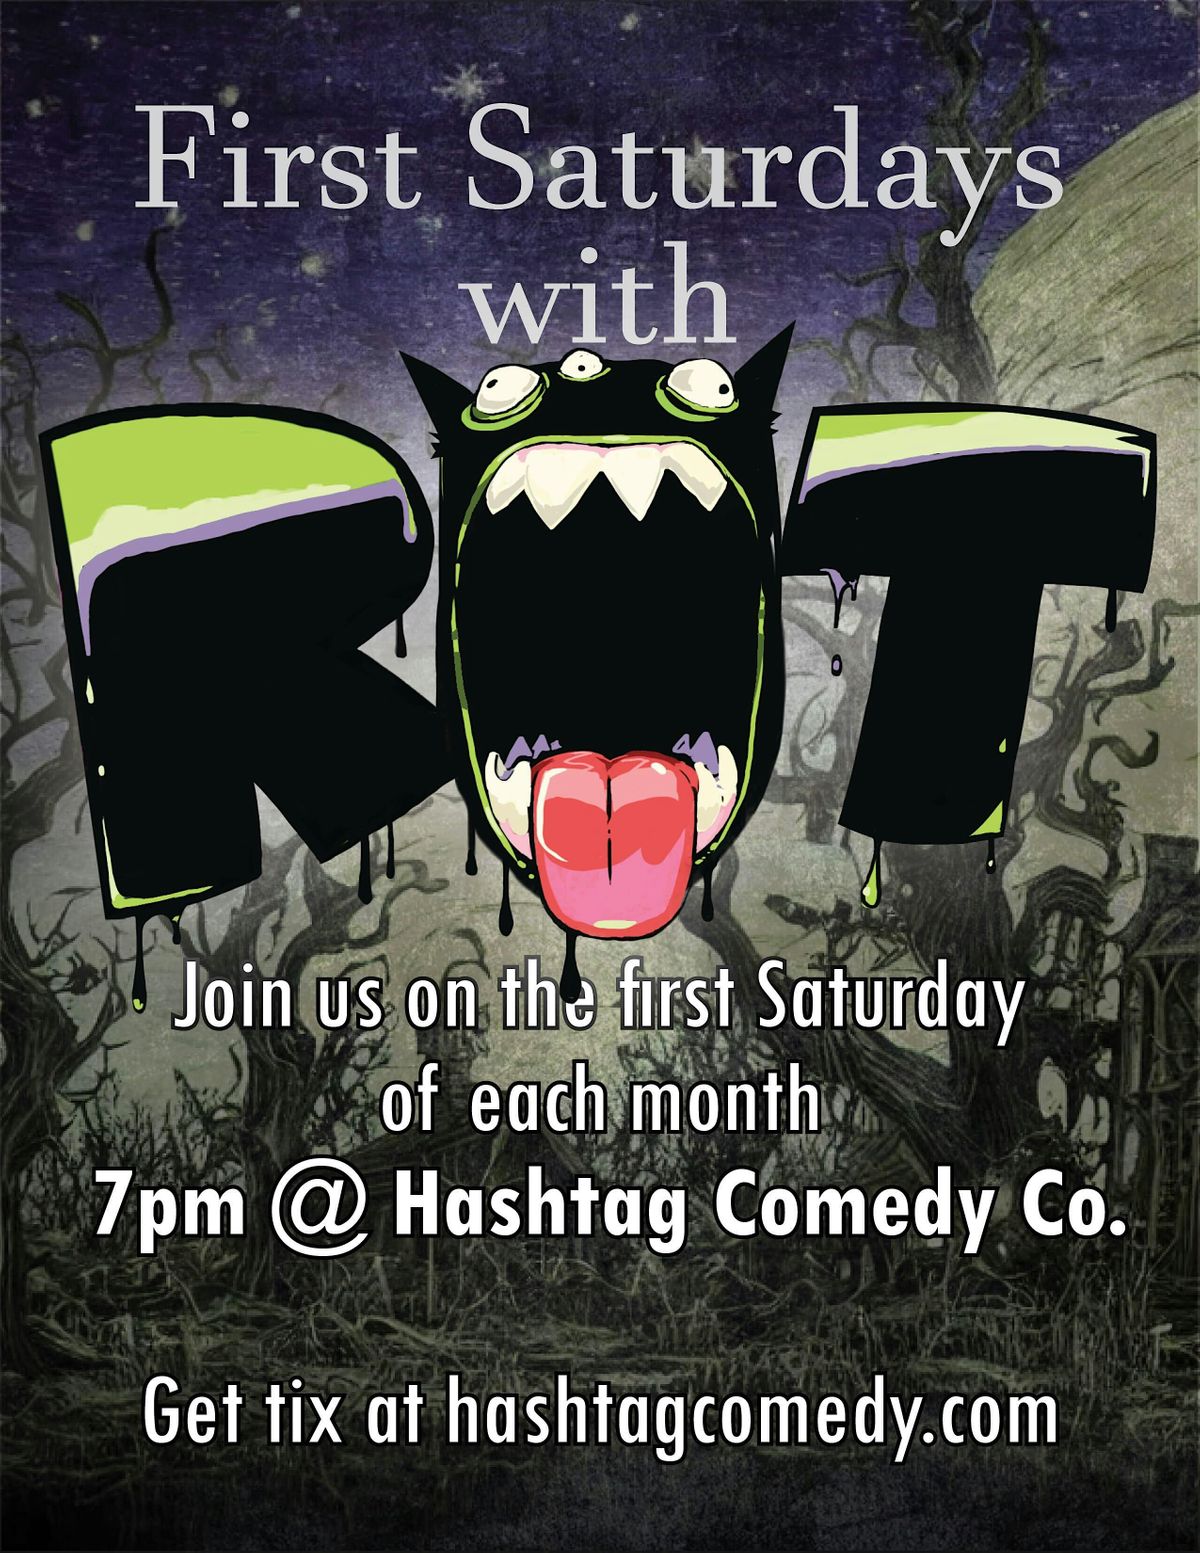 First Saturdays with.....ROT!